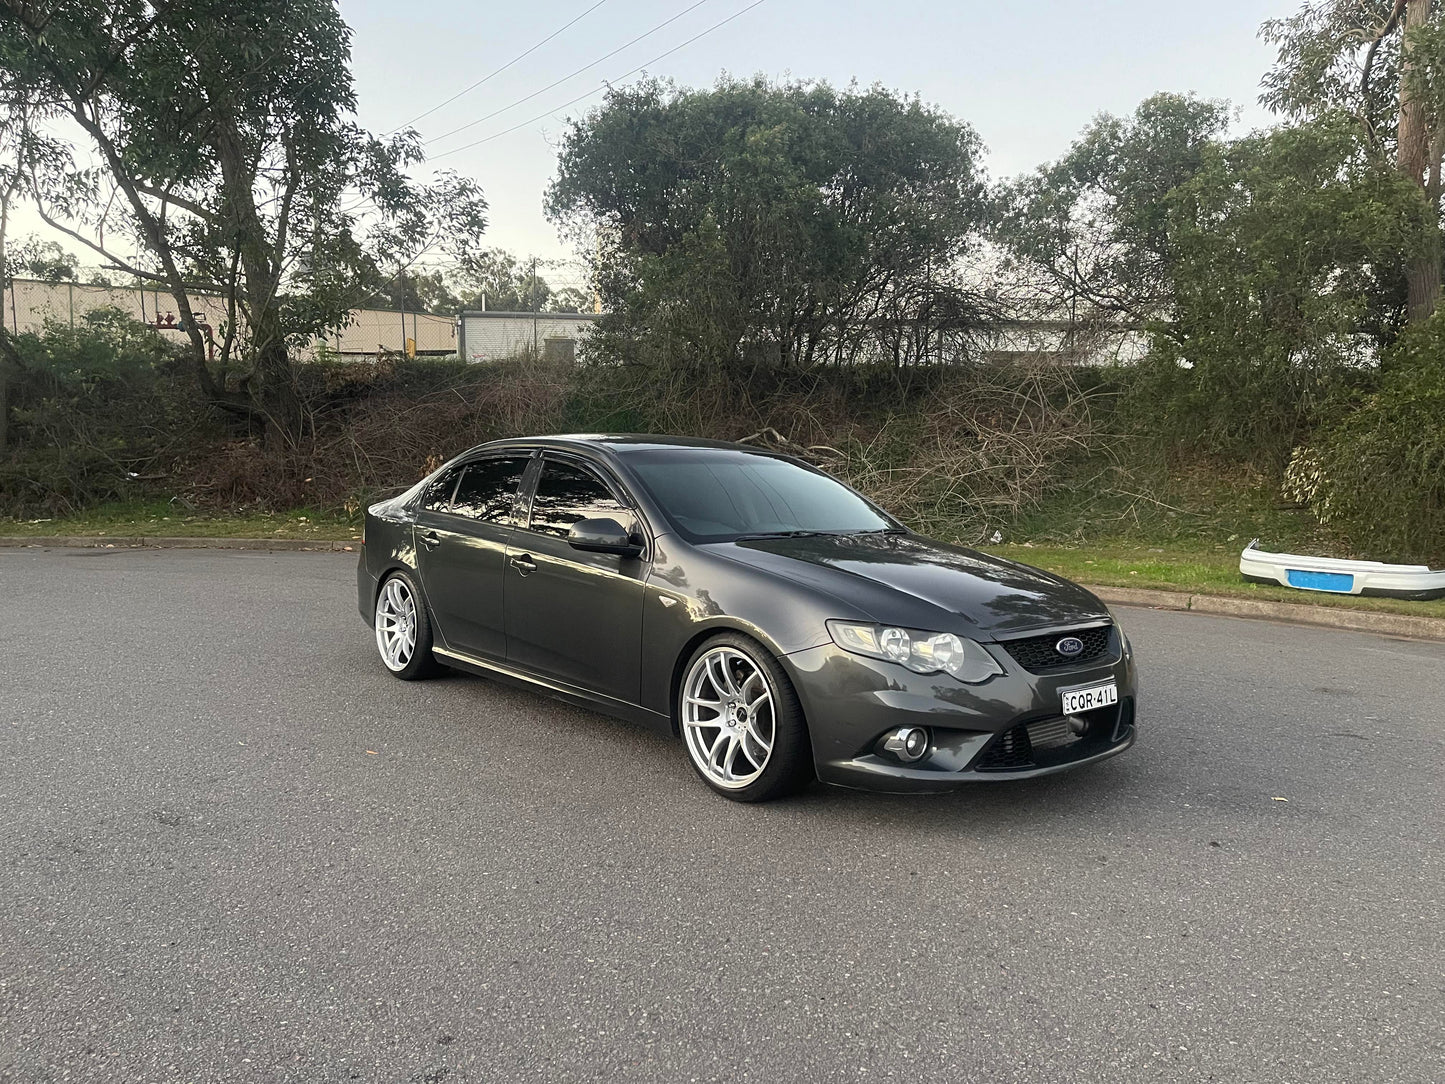 Ford FG Falcon - D-Speed DS-02 19x9.5 +25